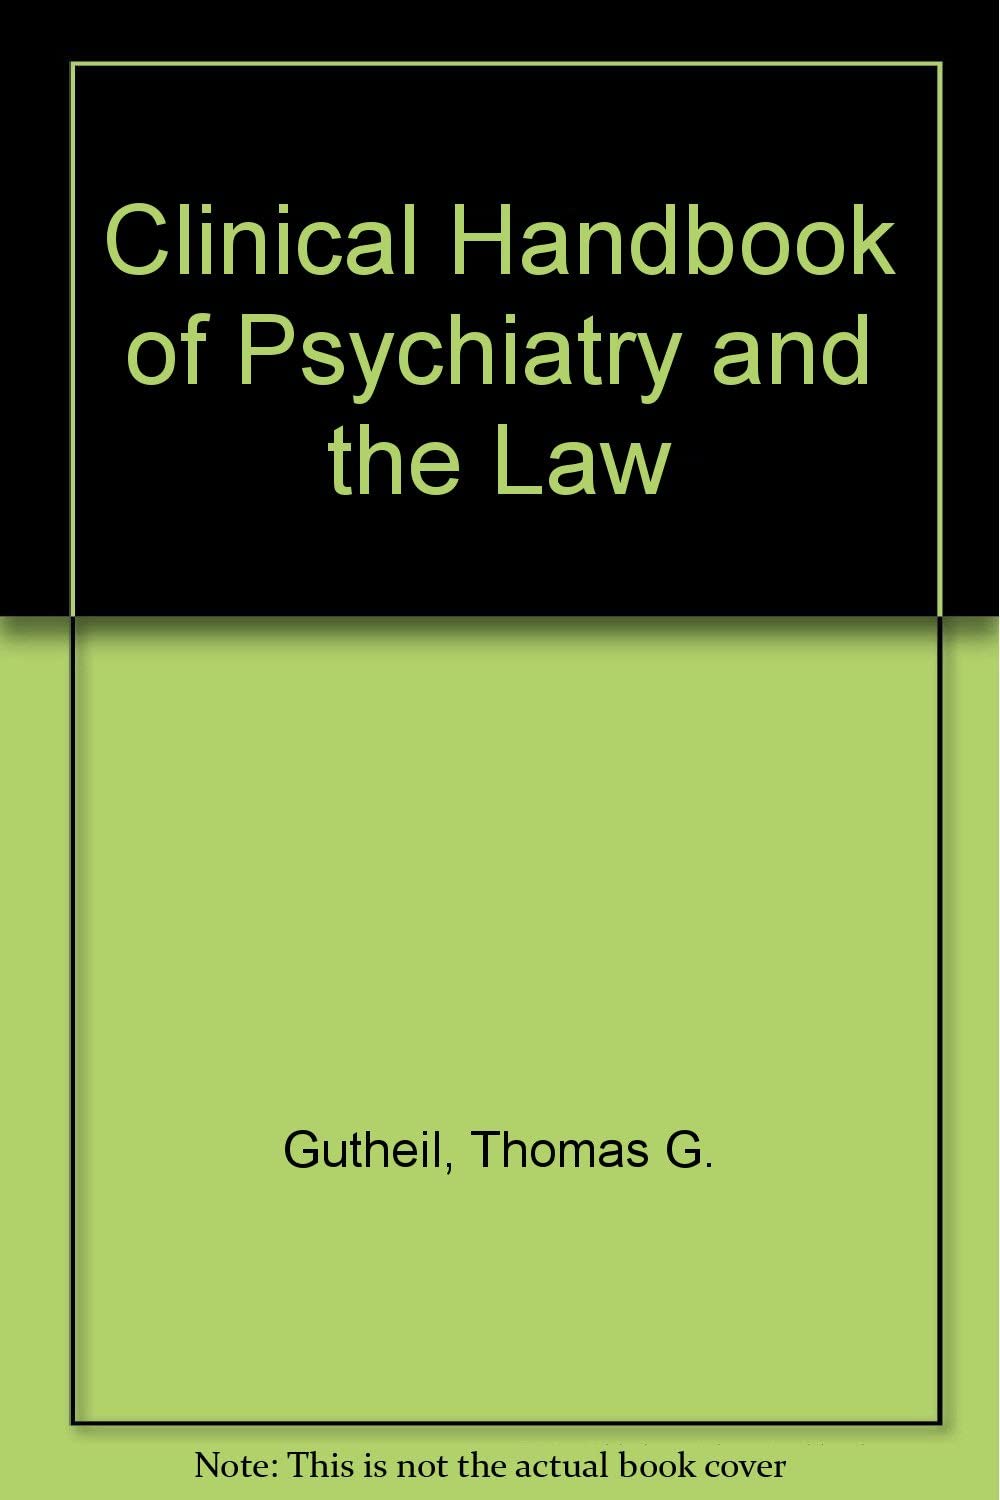 Clinical handbook of psychiatry and the law